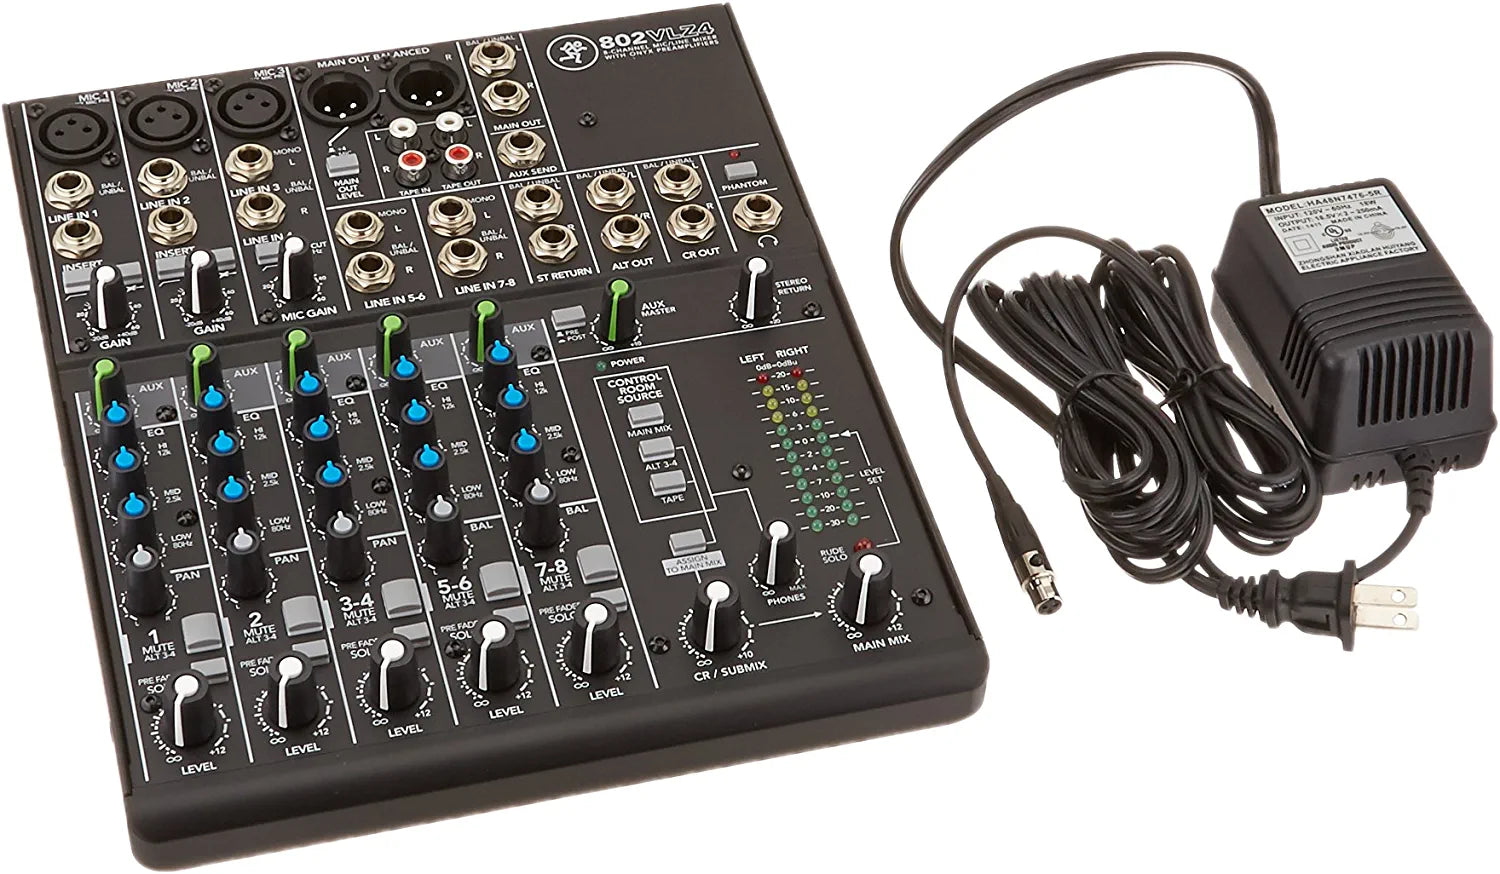 Mackie 802VLZ4 8-channel Ultra Compact Mixer with High Quality Onyx Preamps